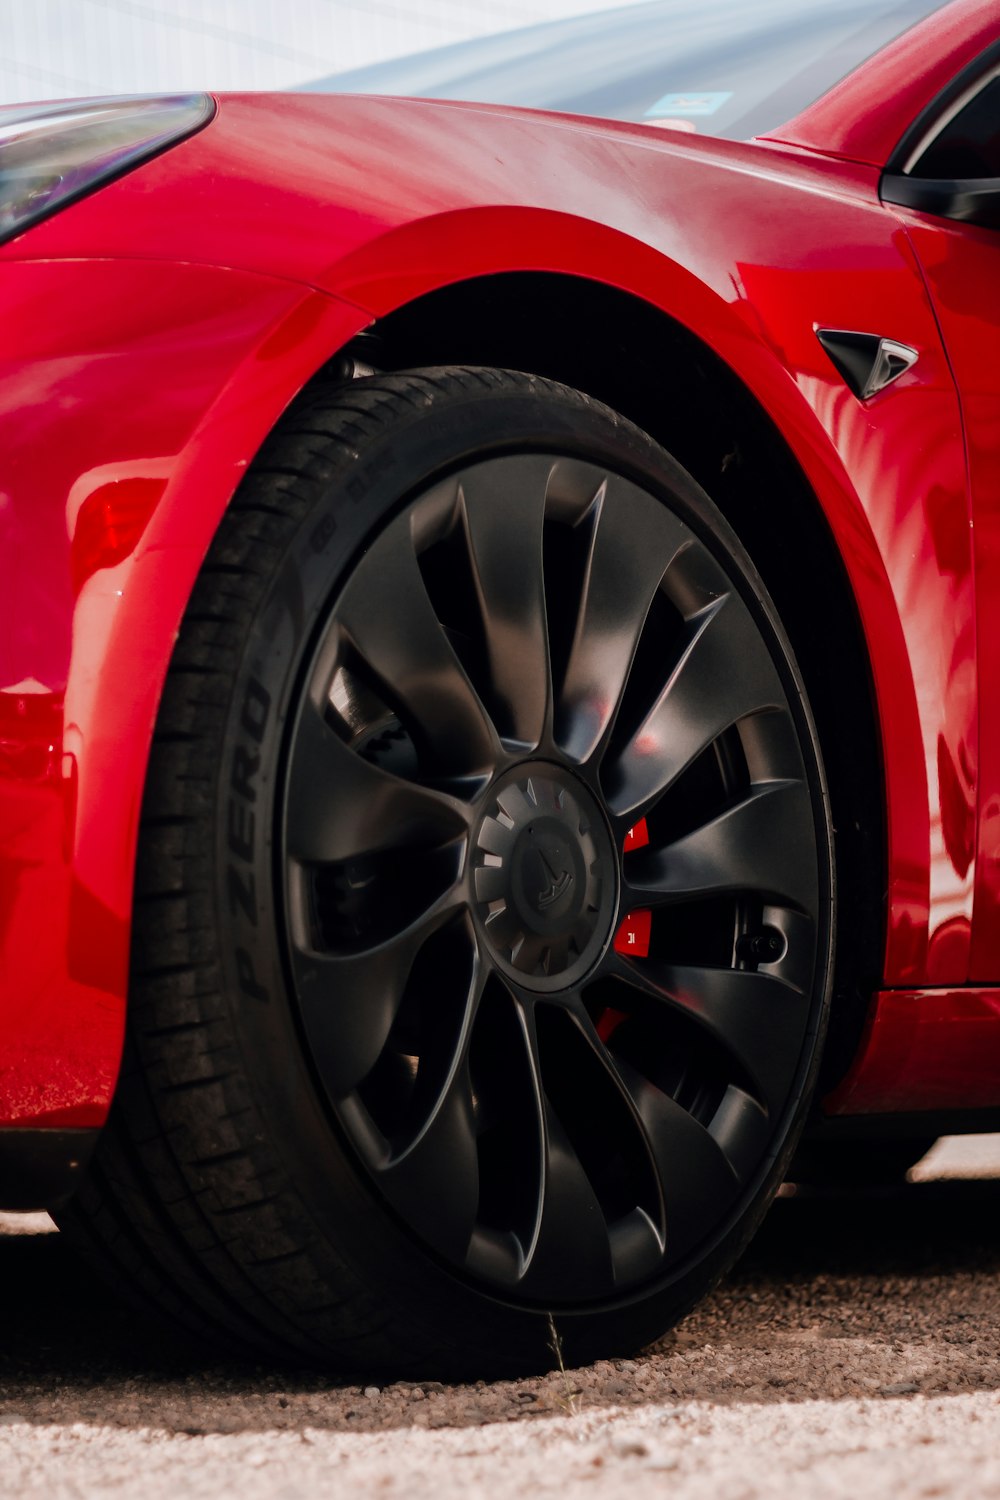 a close up of a red car with black spokes